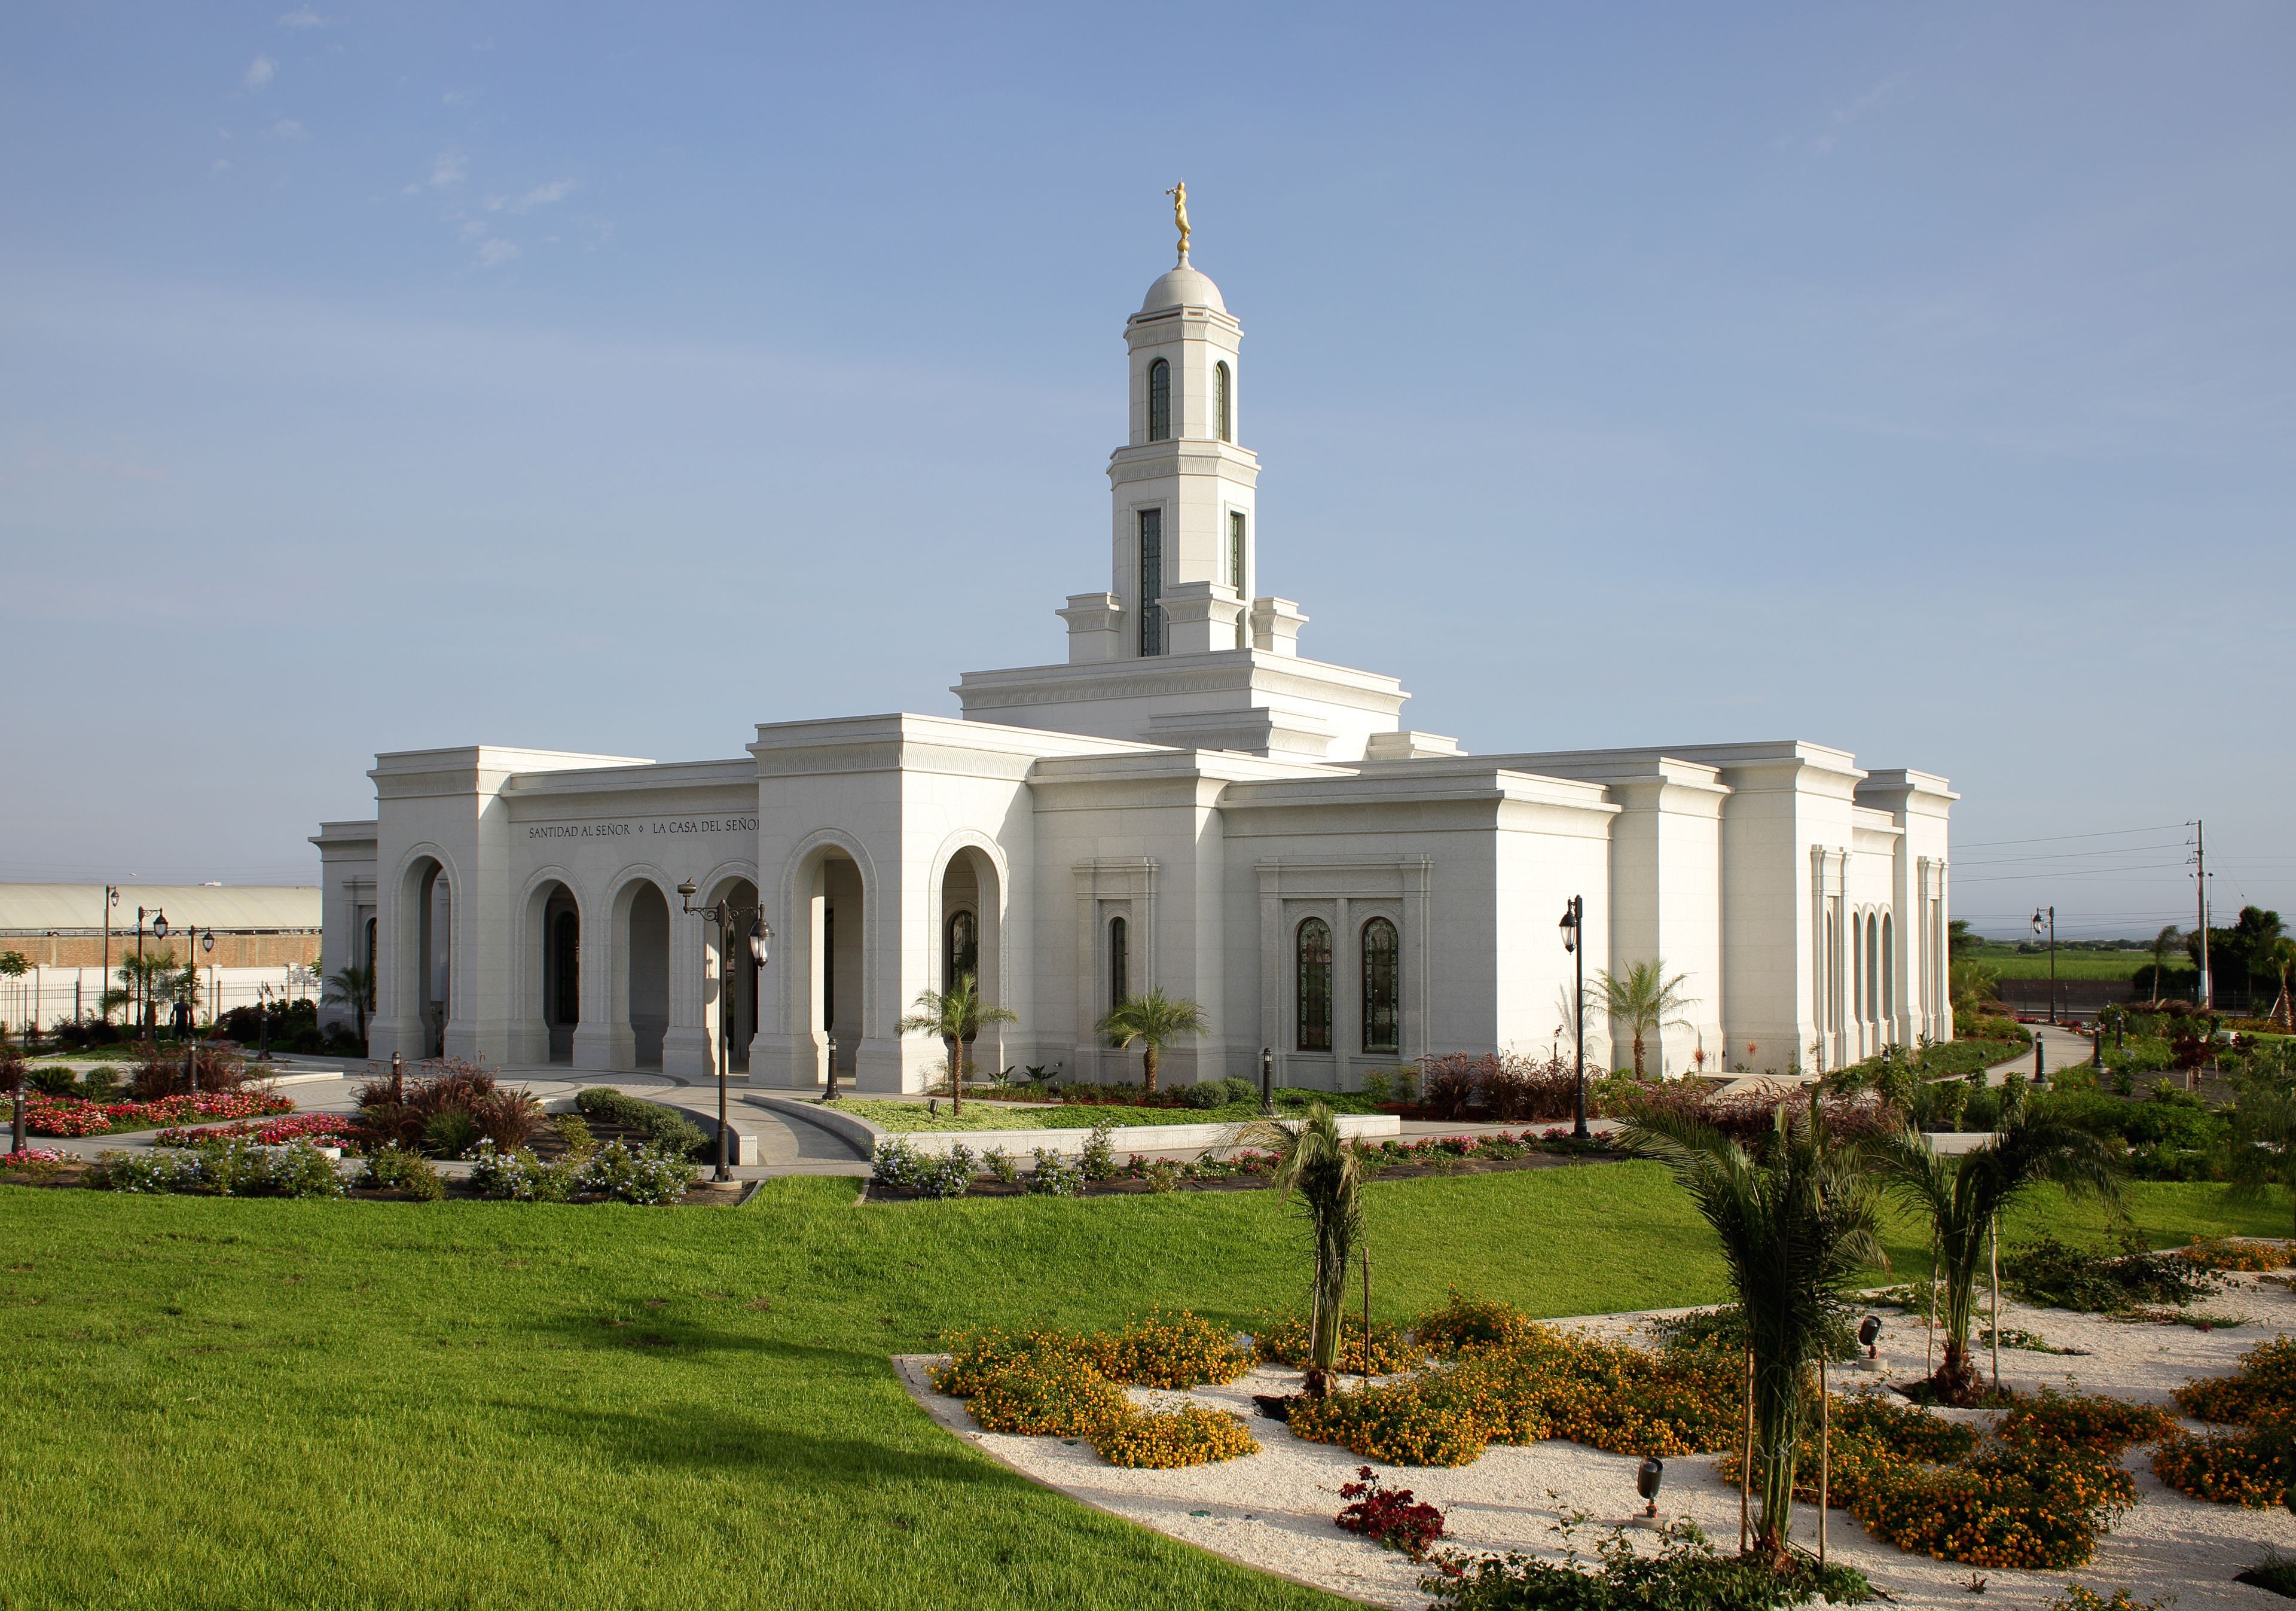 The Trujillo Peru Temple and grounds on a sunny day.